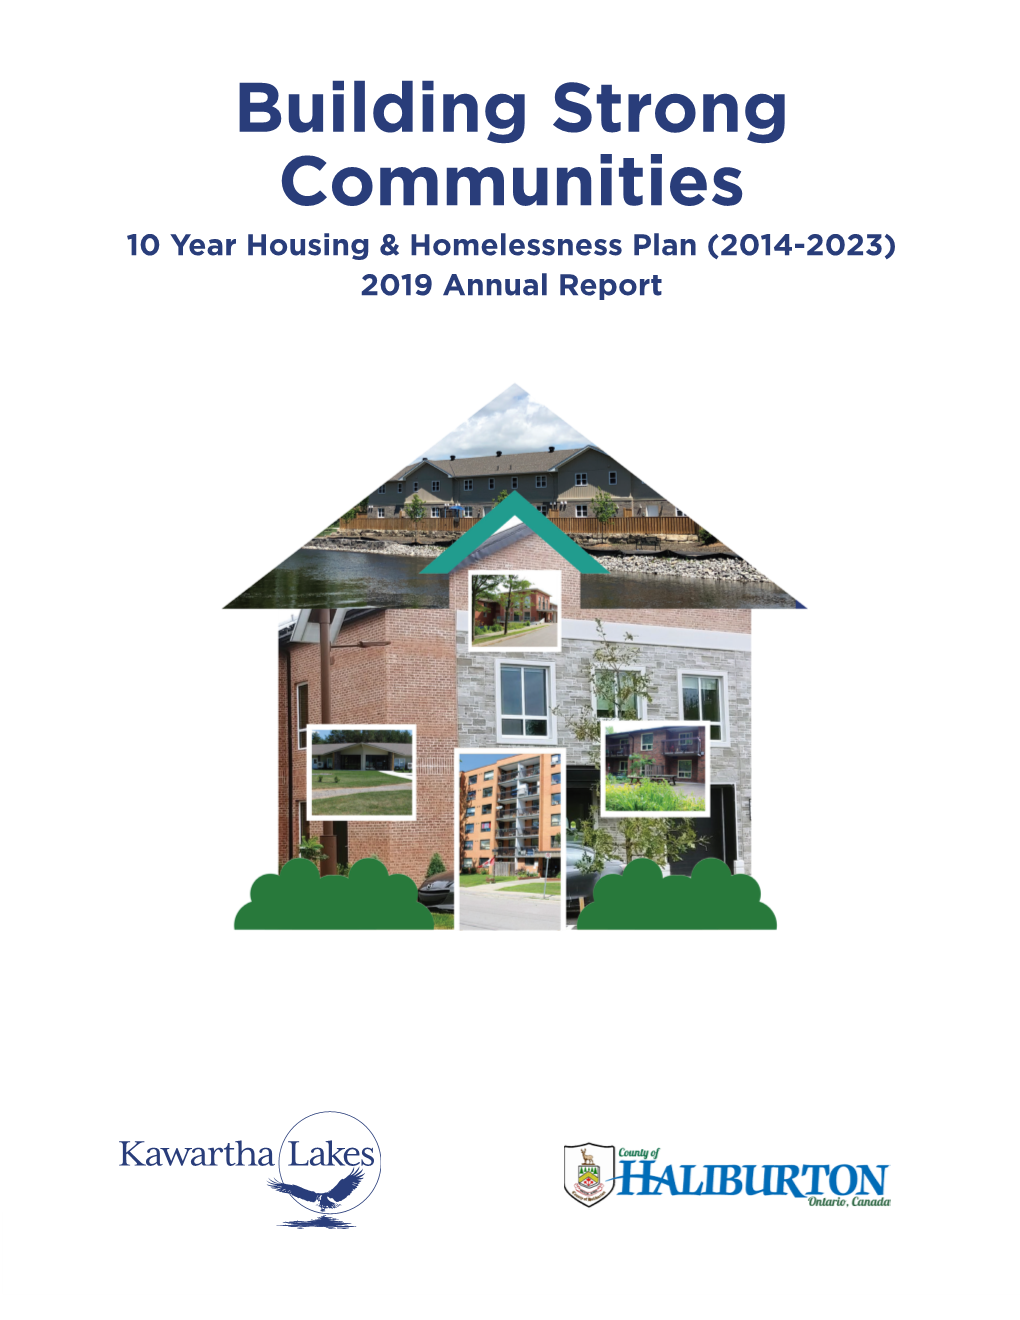 Building Strong Communities 2019 Annual Report the City of Kawartha Lakes